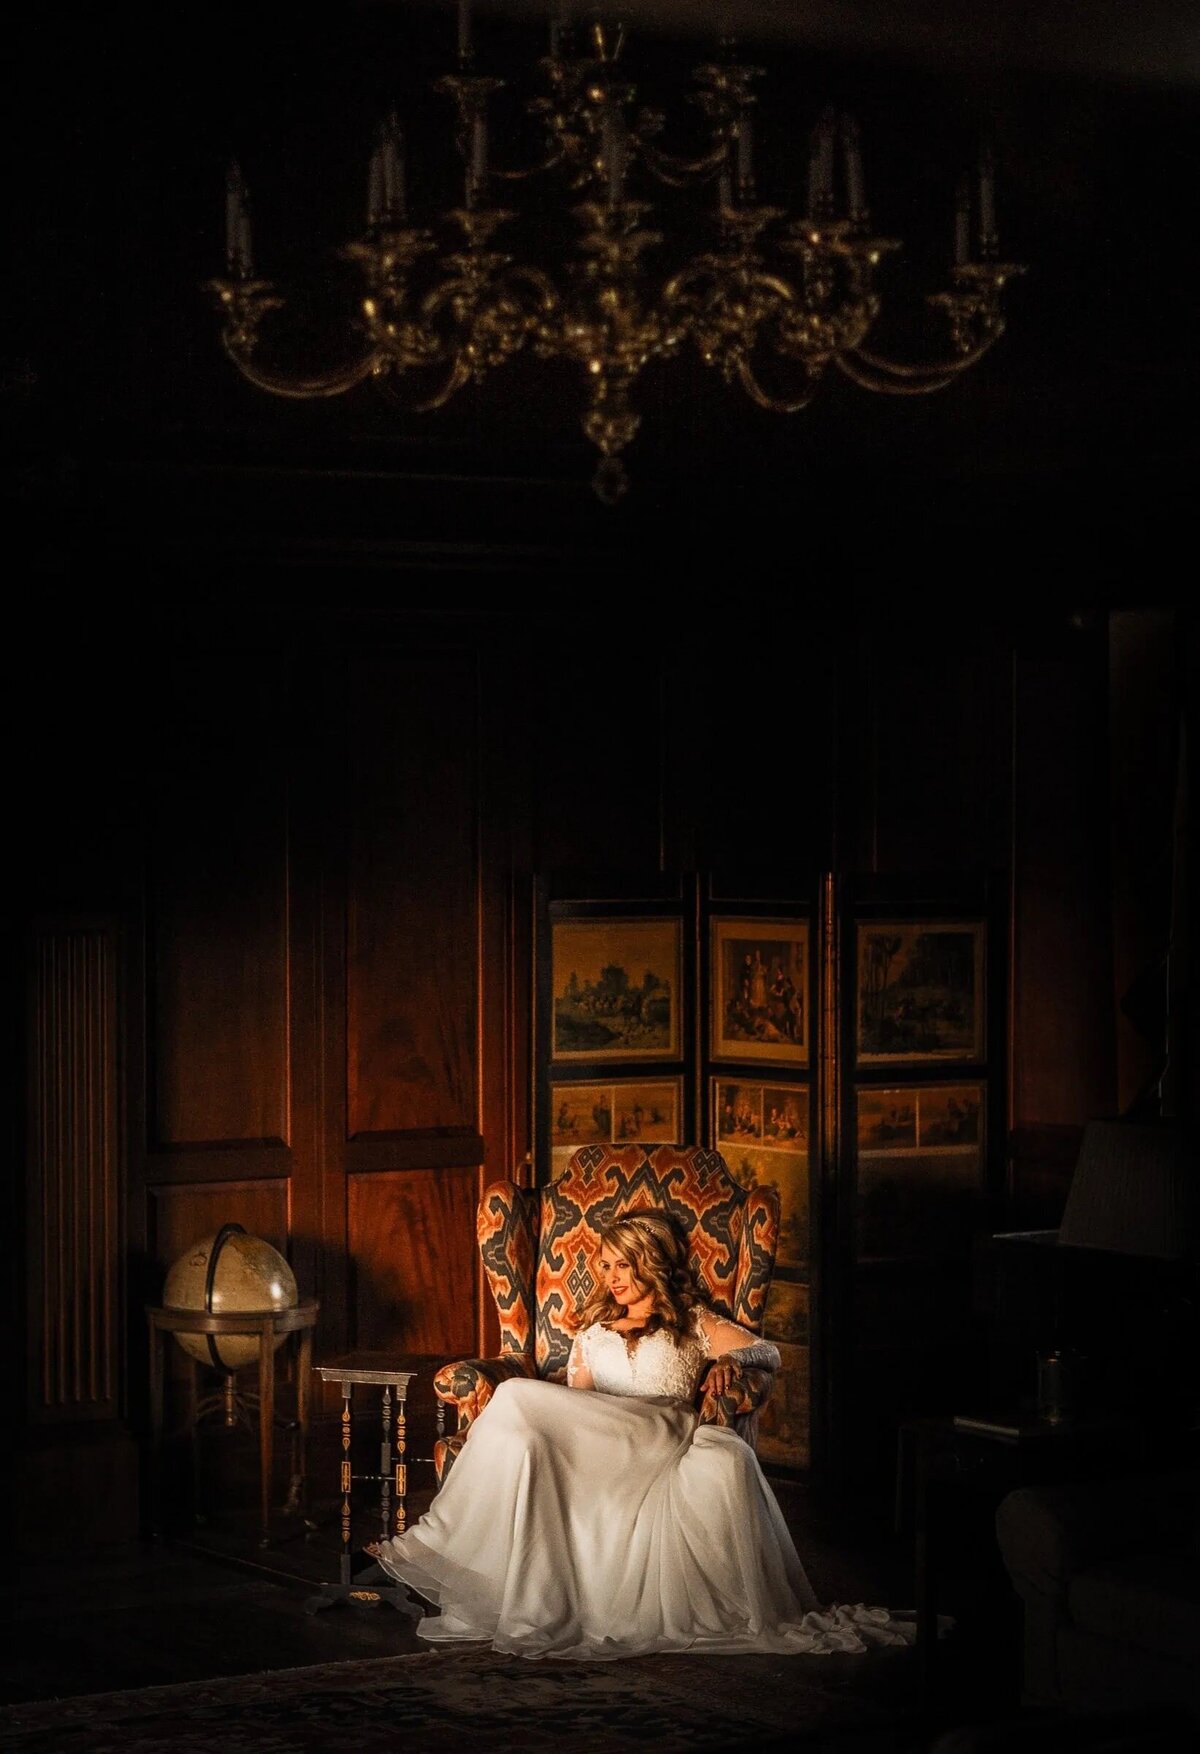 A bride sitting in a large decorative chair